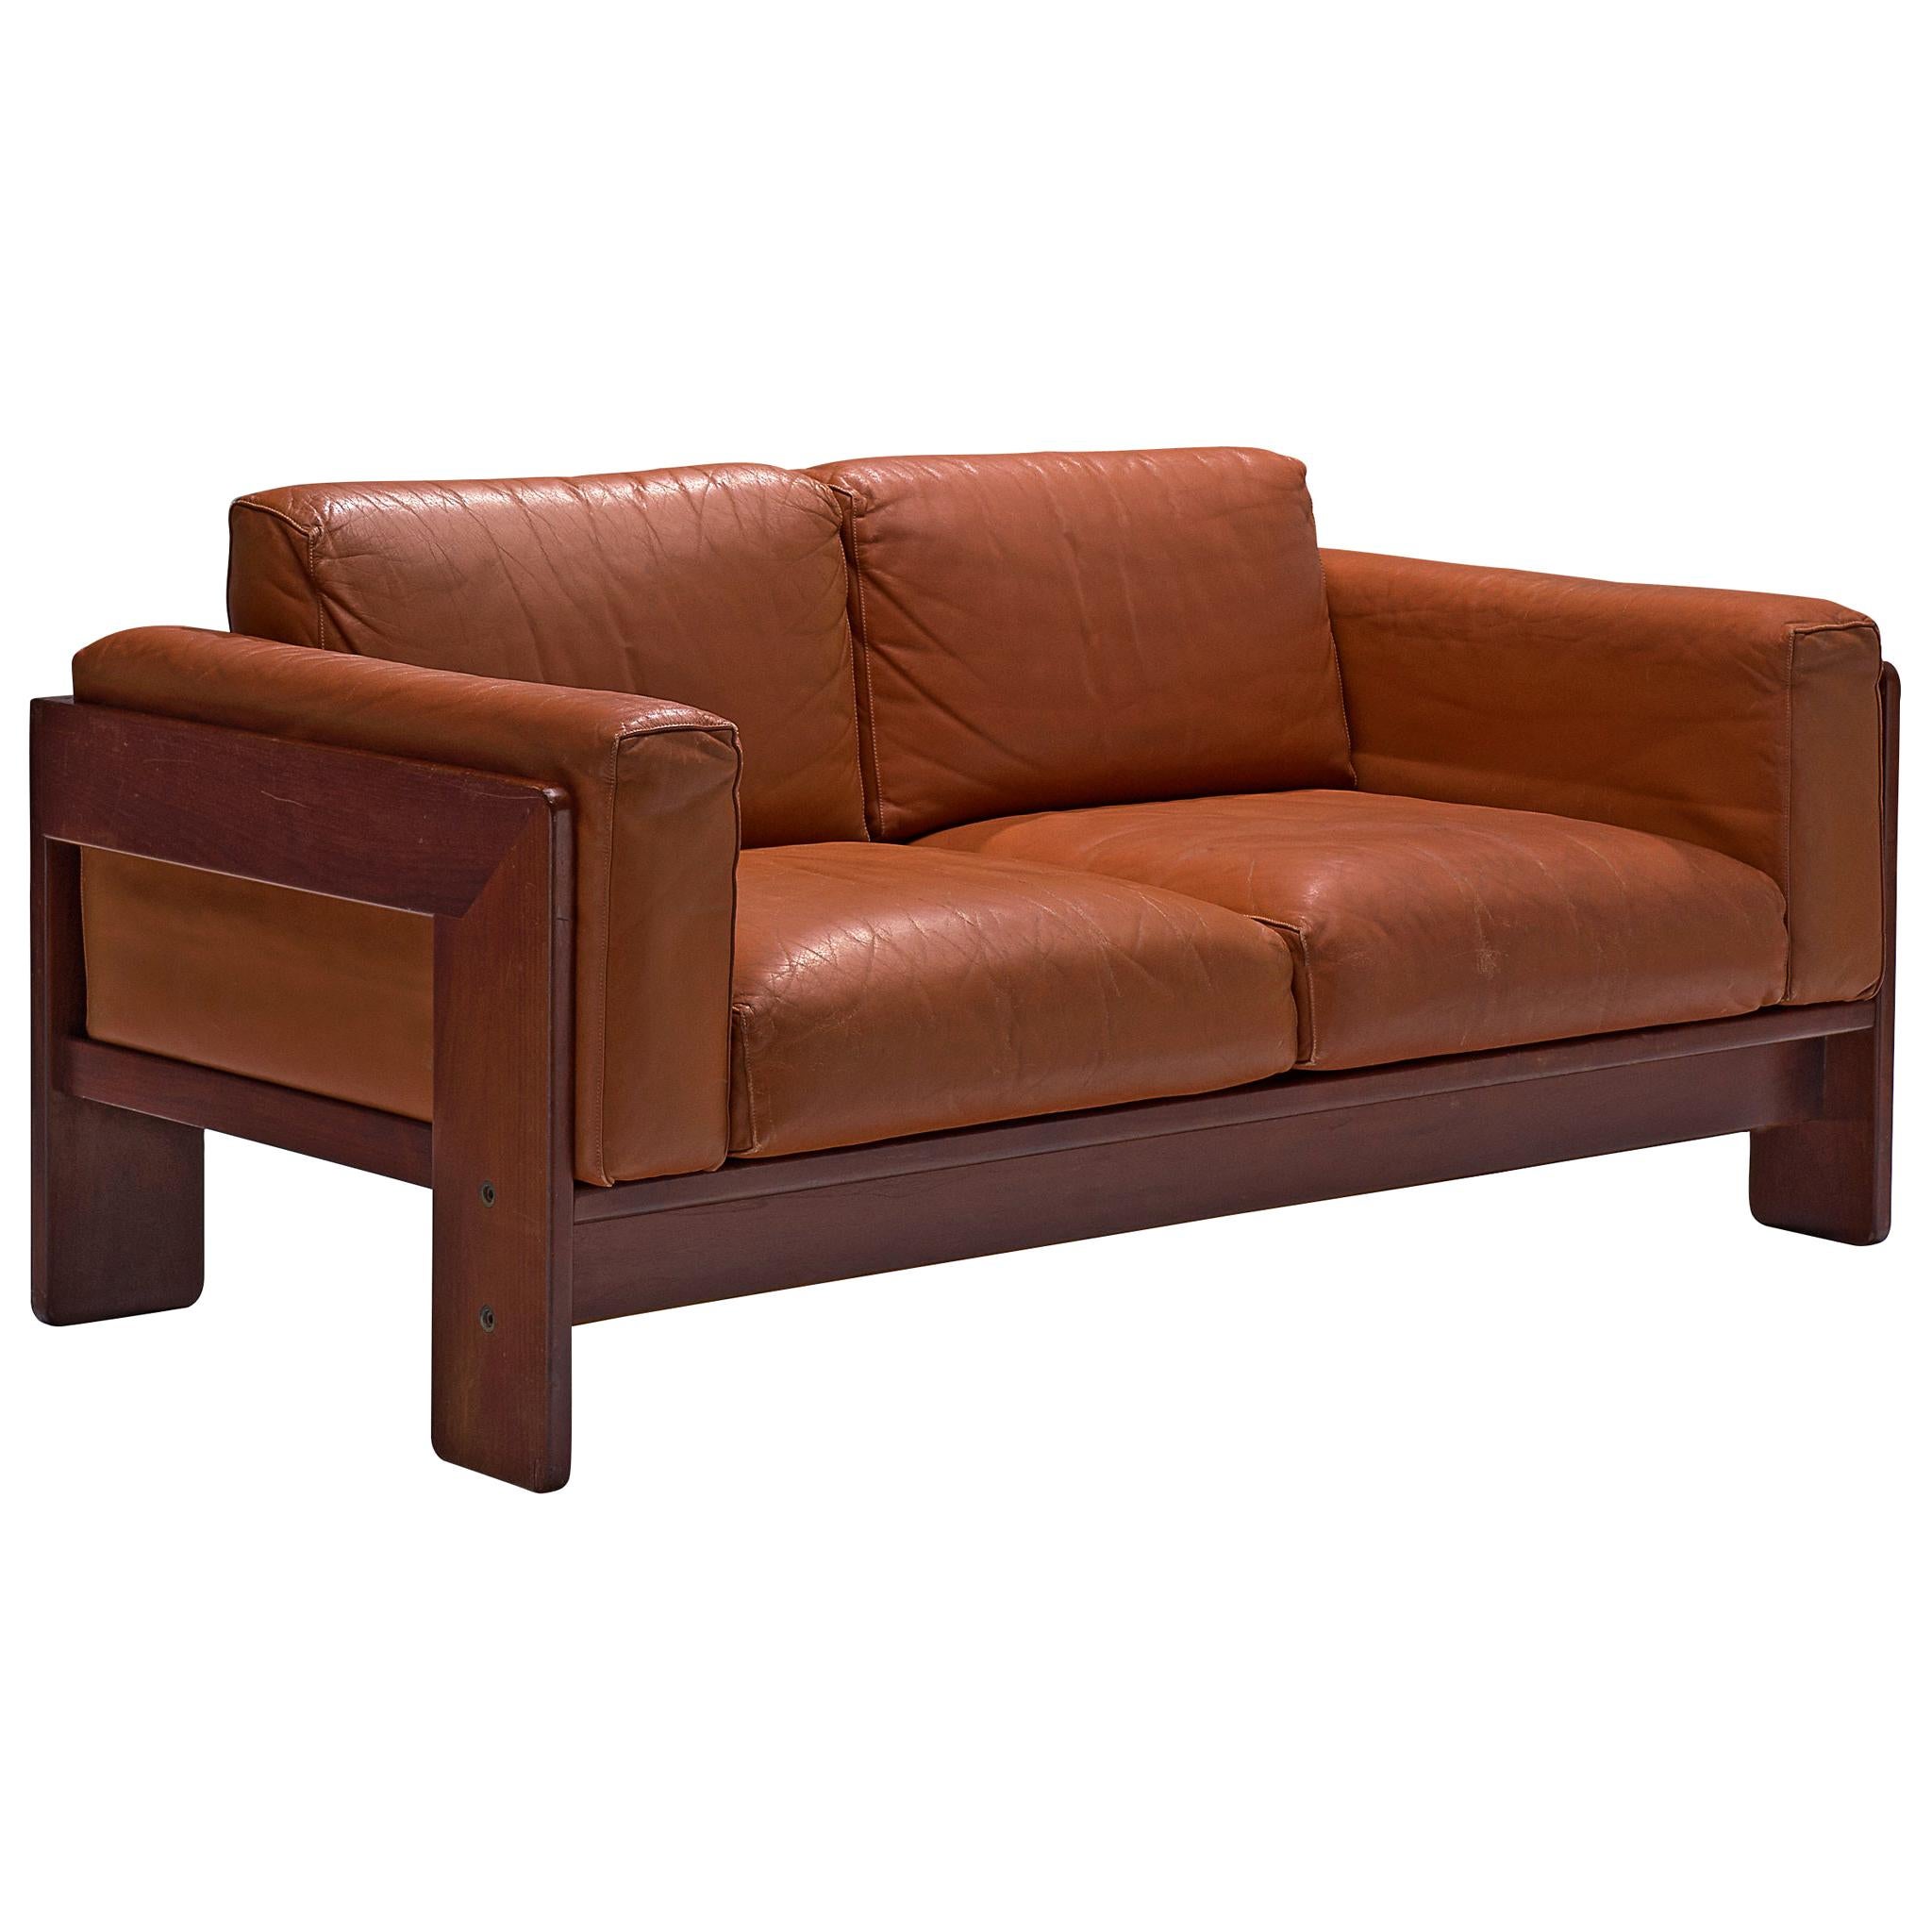 Tobia Scarpa 'Bastiano' Two-Seat Sofa with Cognac Leather